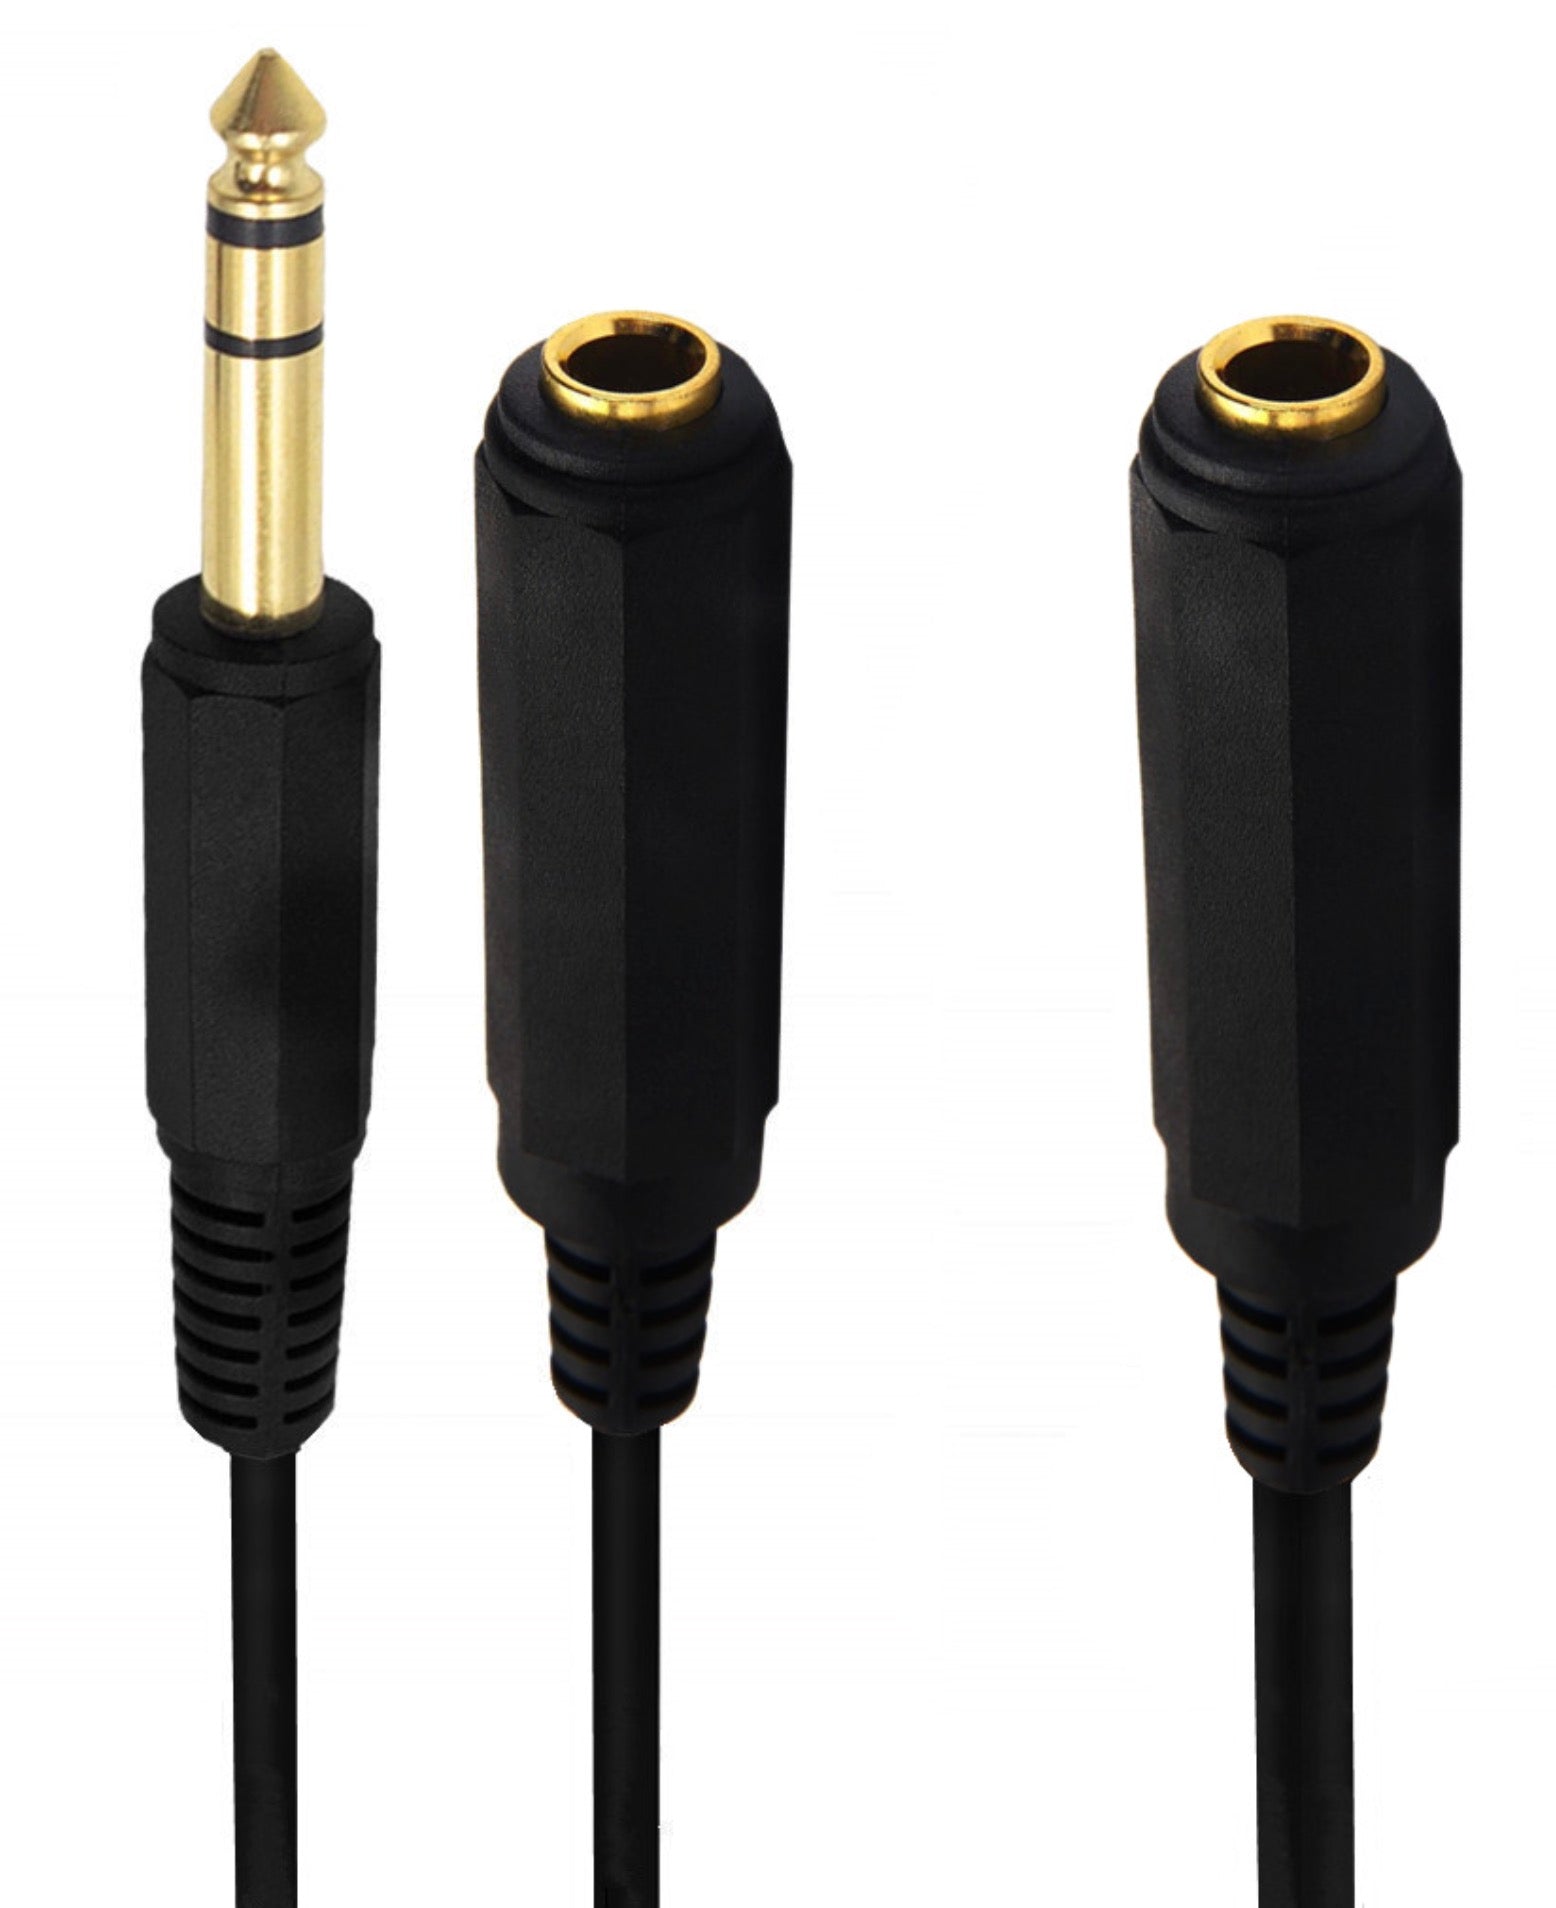 6.35mm 1/4" TRS Stereo Female to 6.35mm 1/4" TRS Stereo Female + 6.35mm Male Y Splitter Cable 0.2m